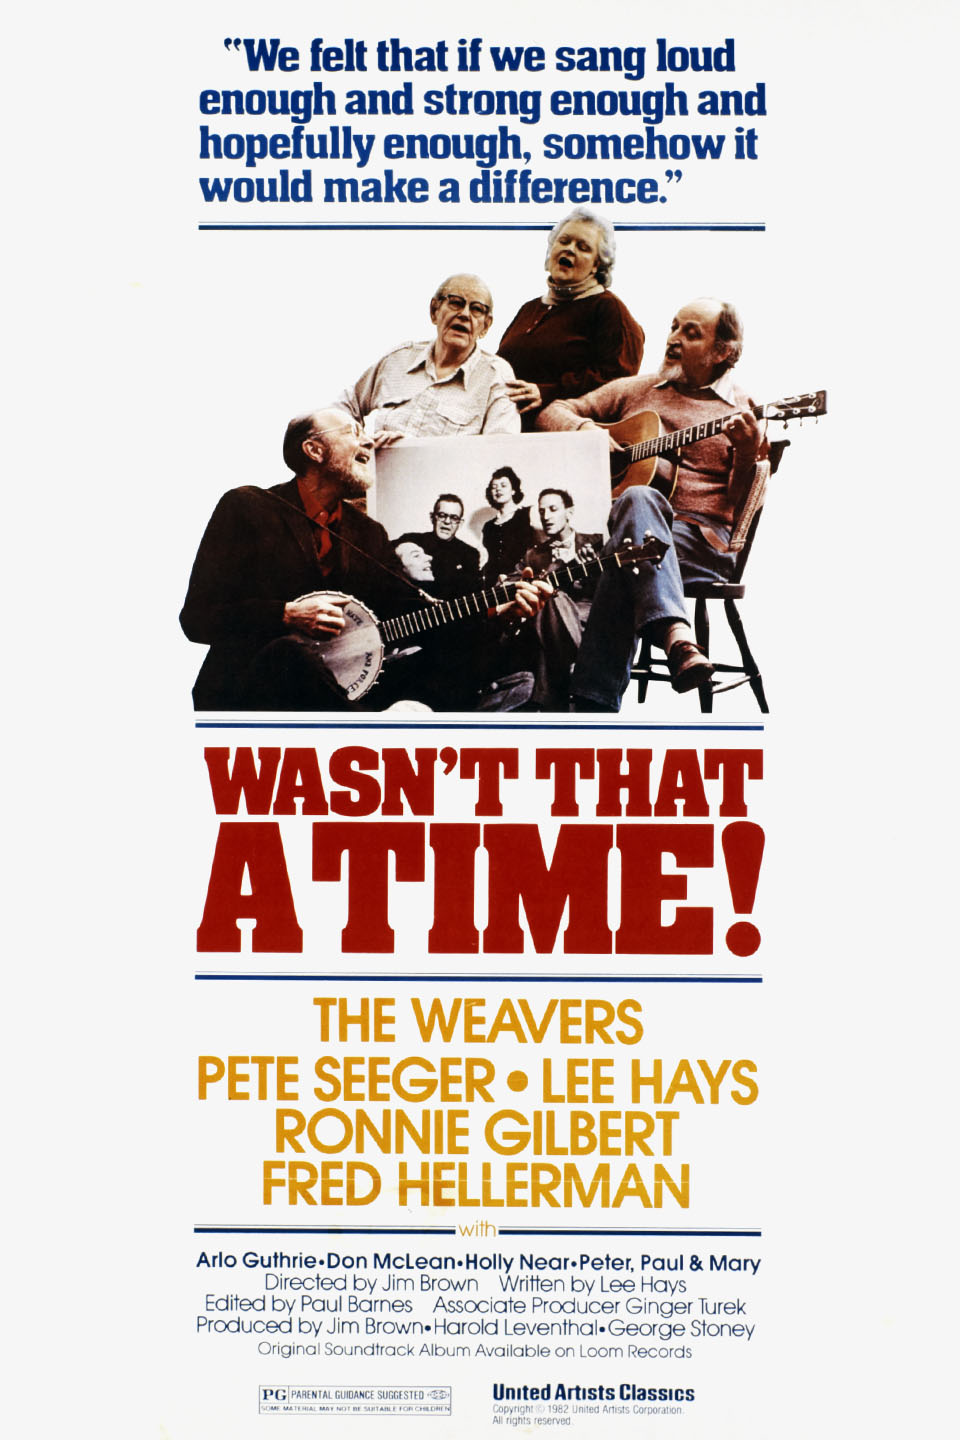 Relix 44: The Weavers’ ‘Wasn’t That a Time!’